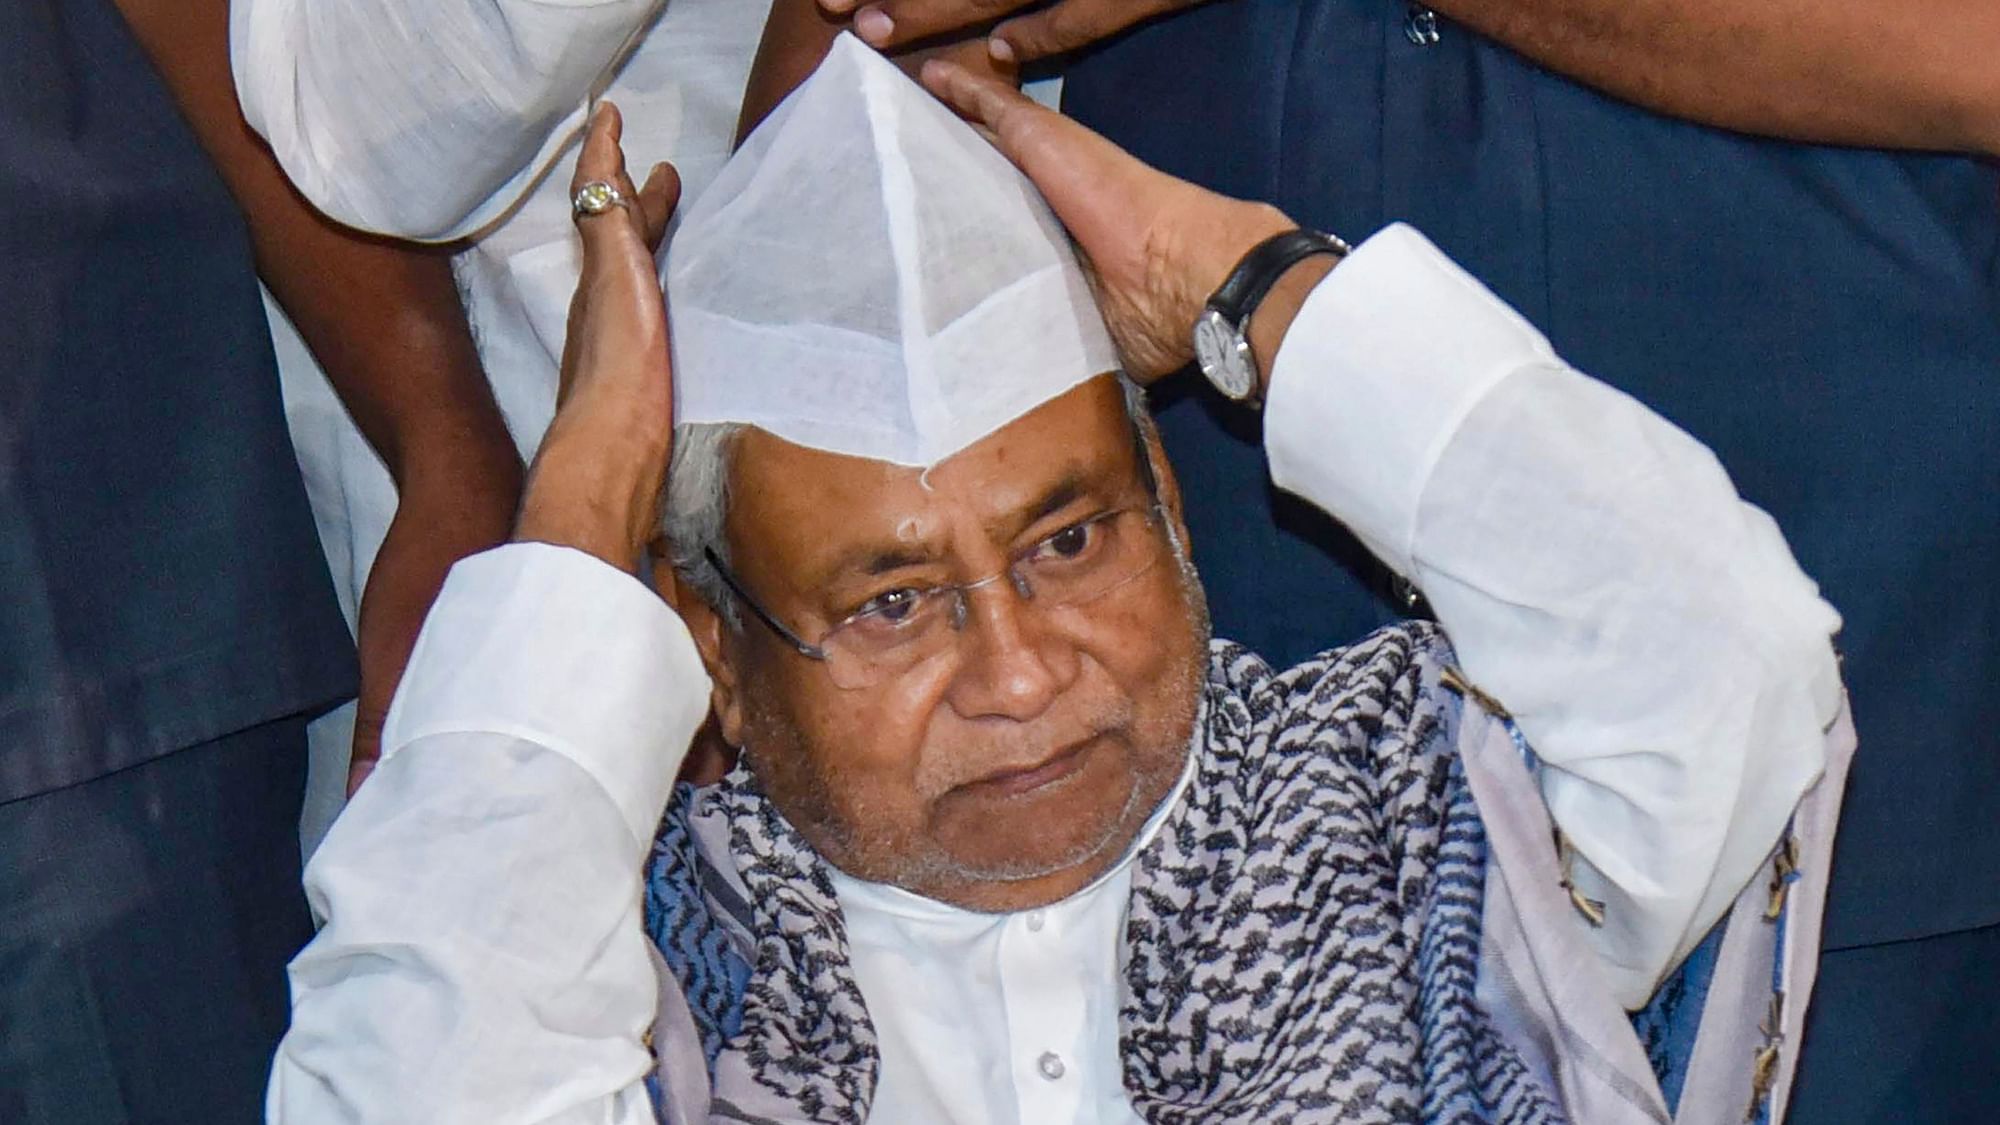 On Monday, Bihar Chief Minister Nitish Kumar attended Iftar parties hosted by both Manjhi and Paswan.